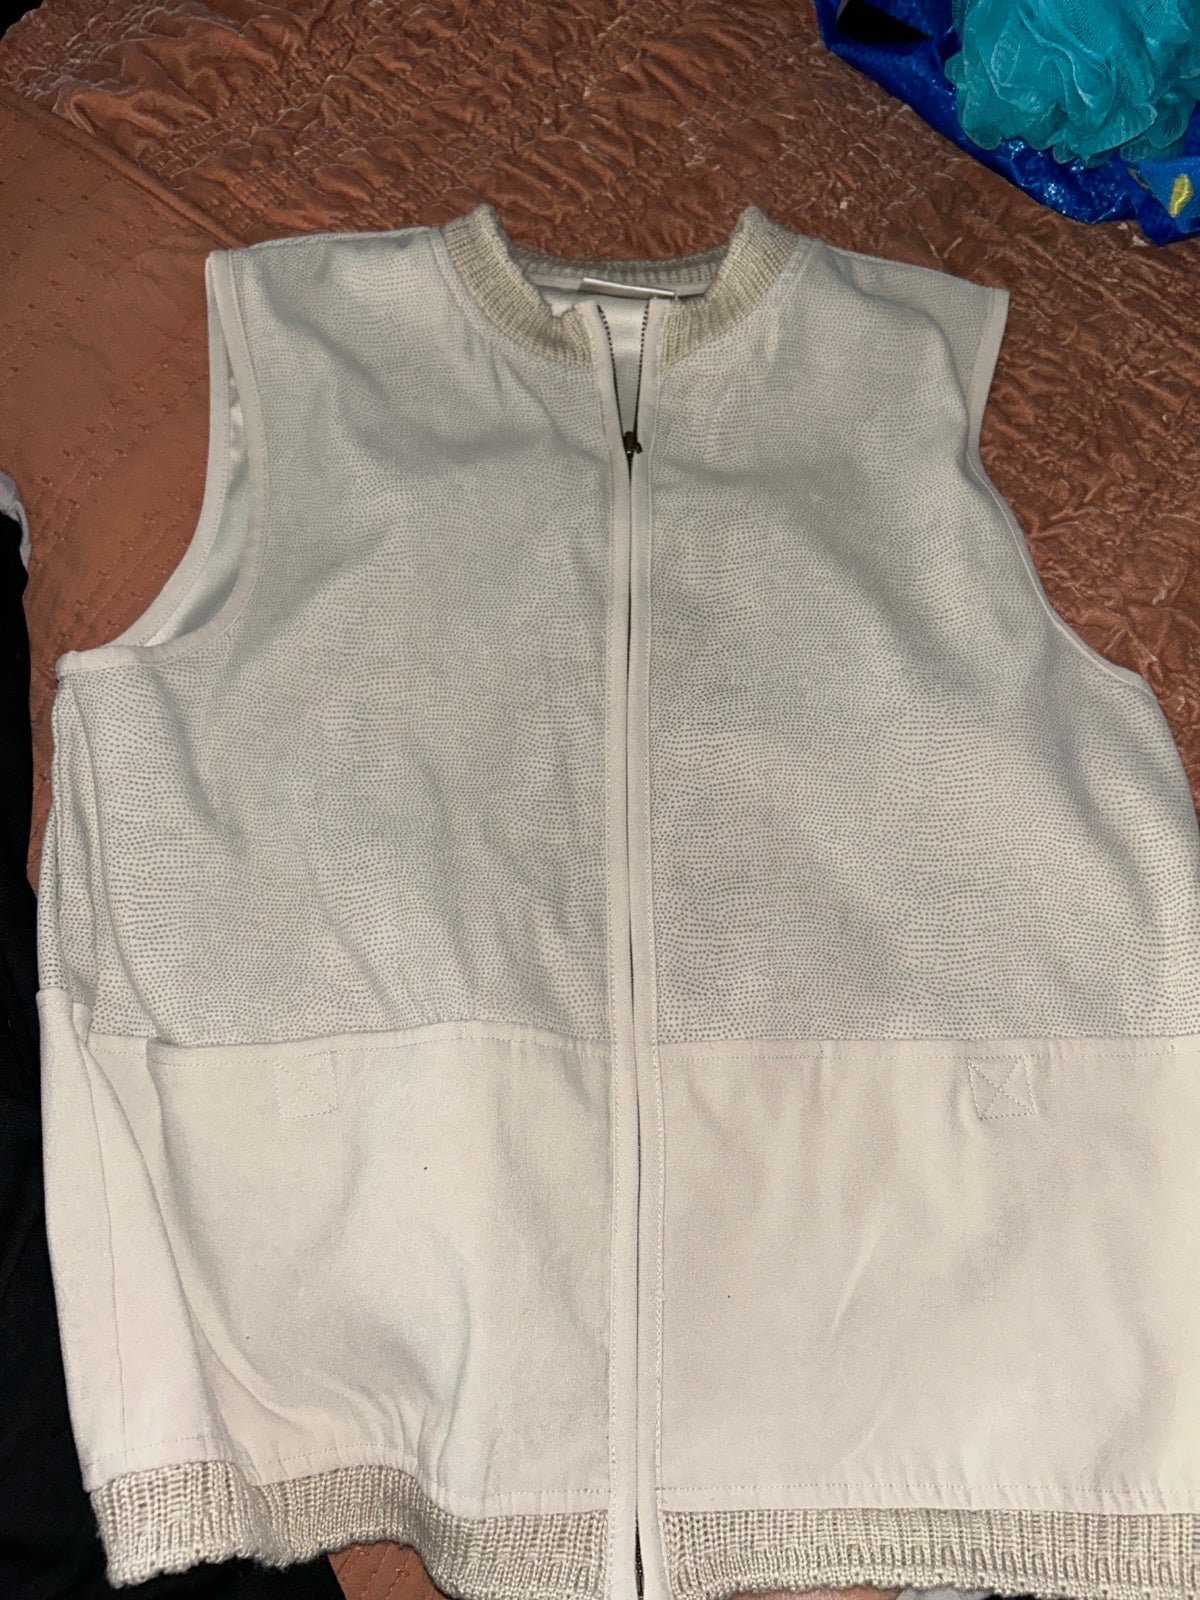 Cute khaki zip up vest with front pockets. Hfvxnurwy